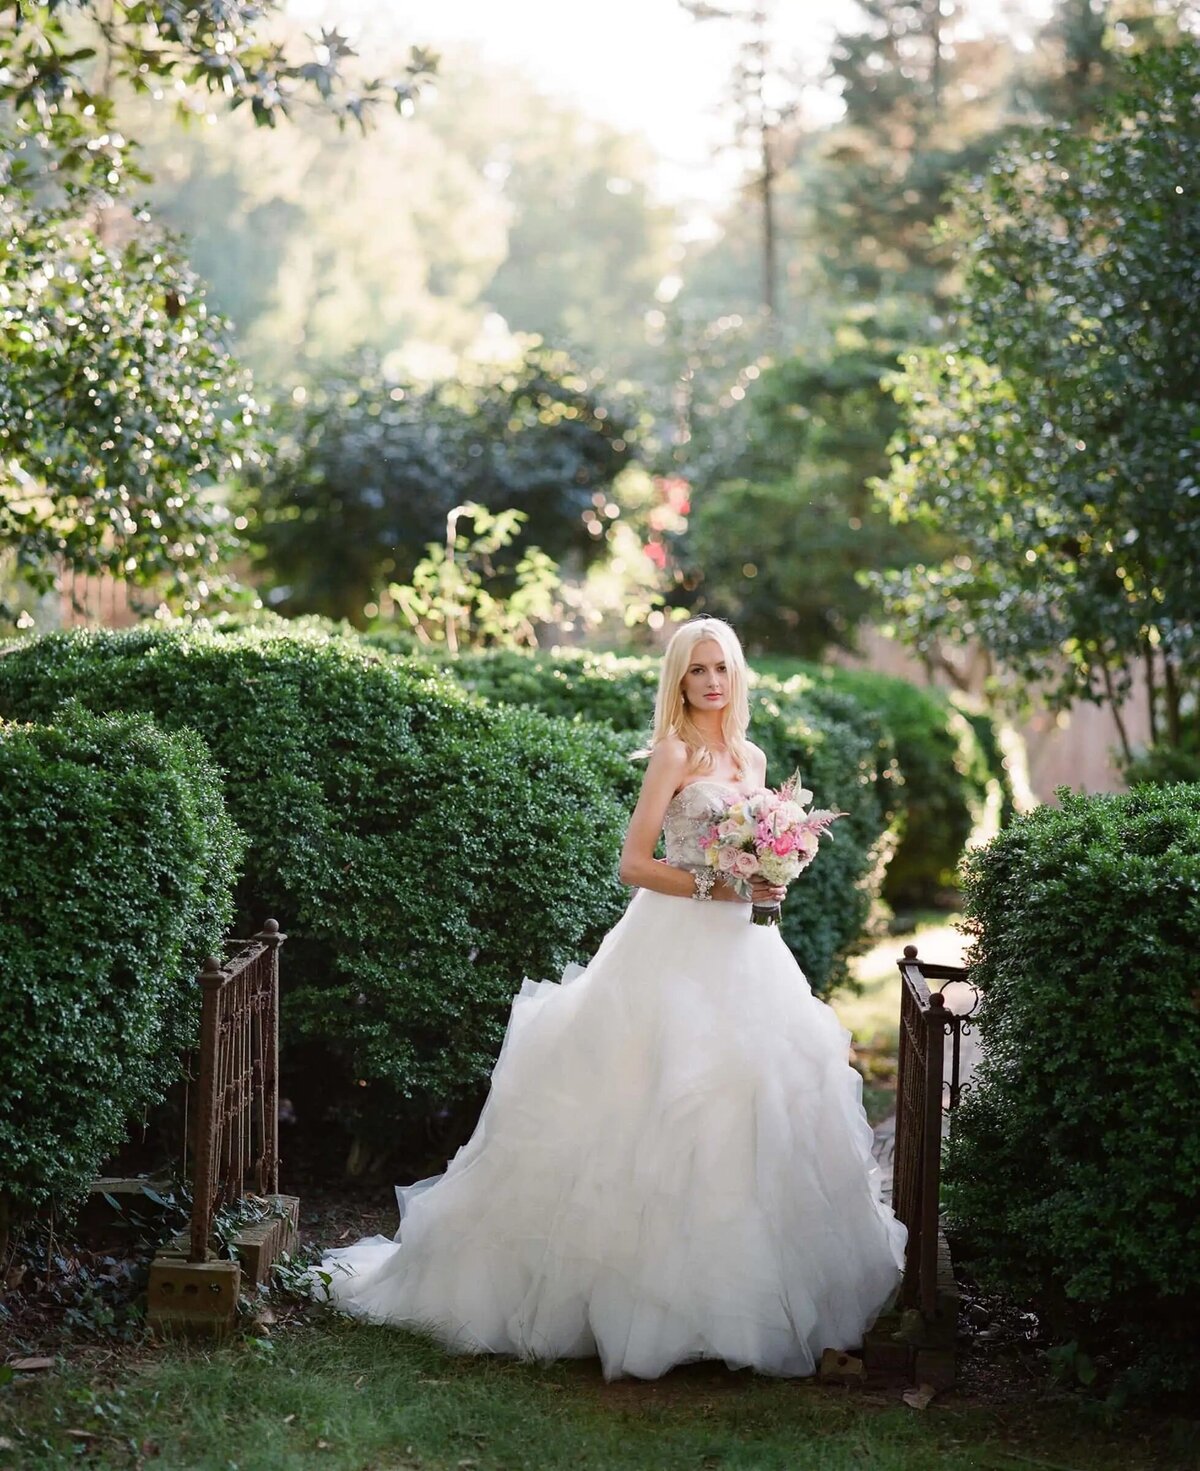 A bride stands in a lush garden, her voluminous gown contrasted with the structured greenery around her, holding a bouquet, poised and elegant.